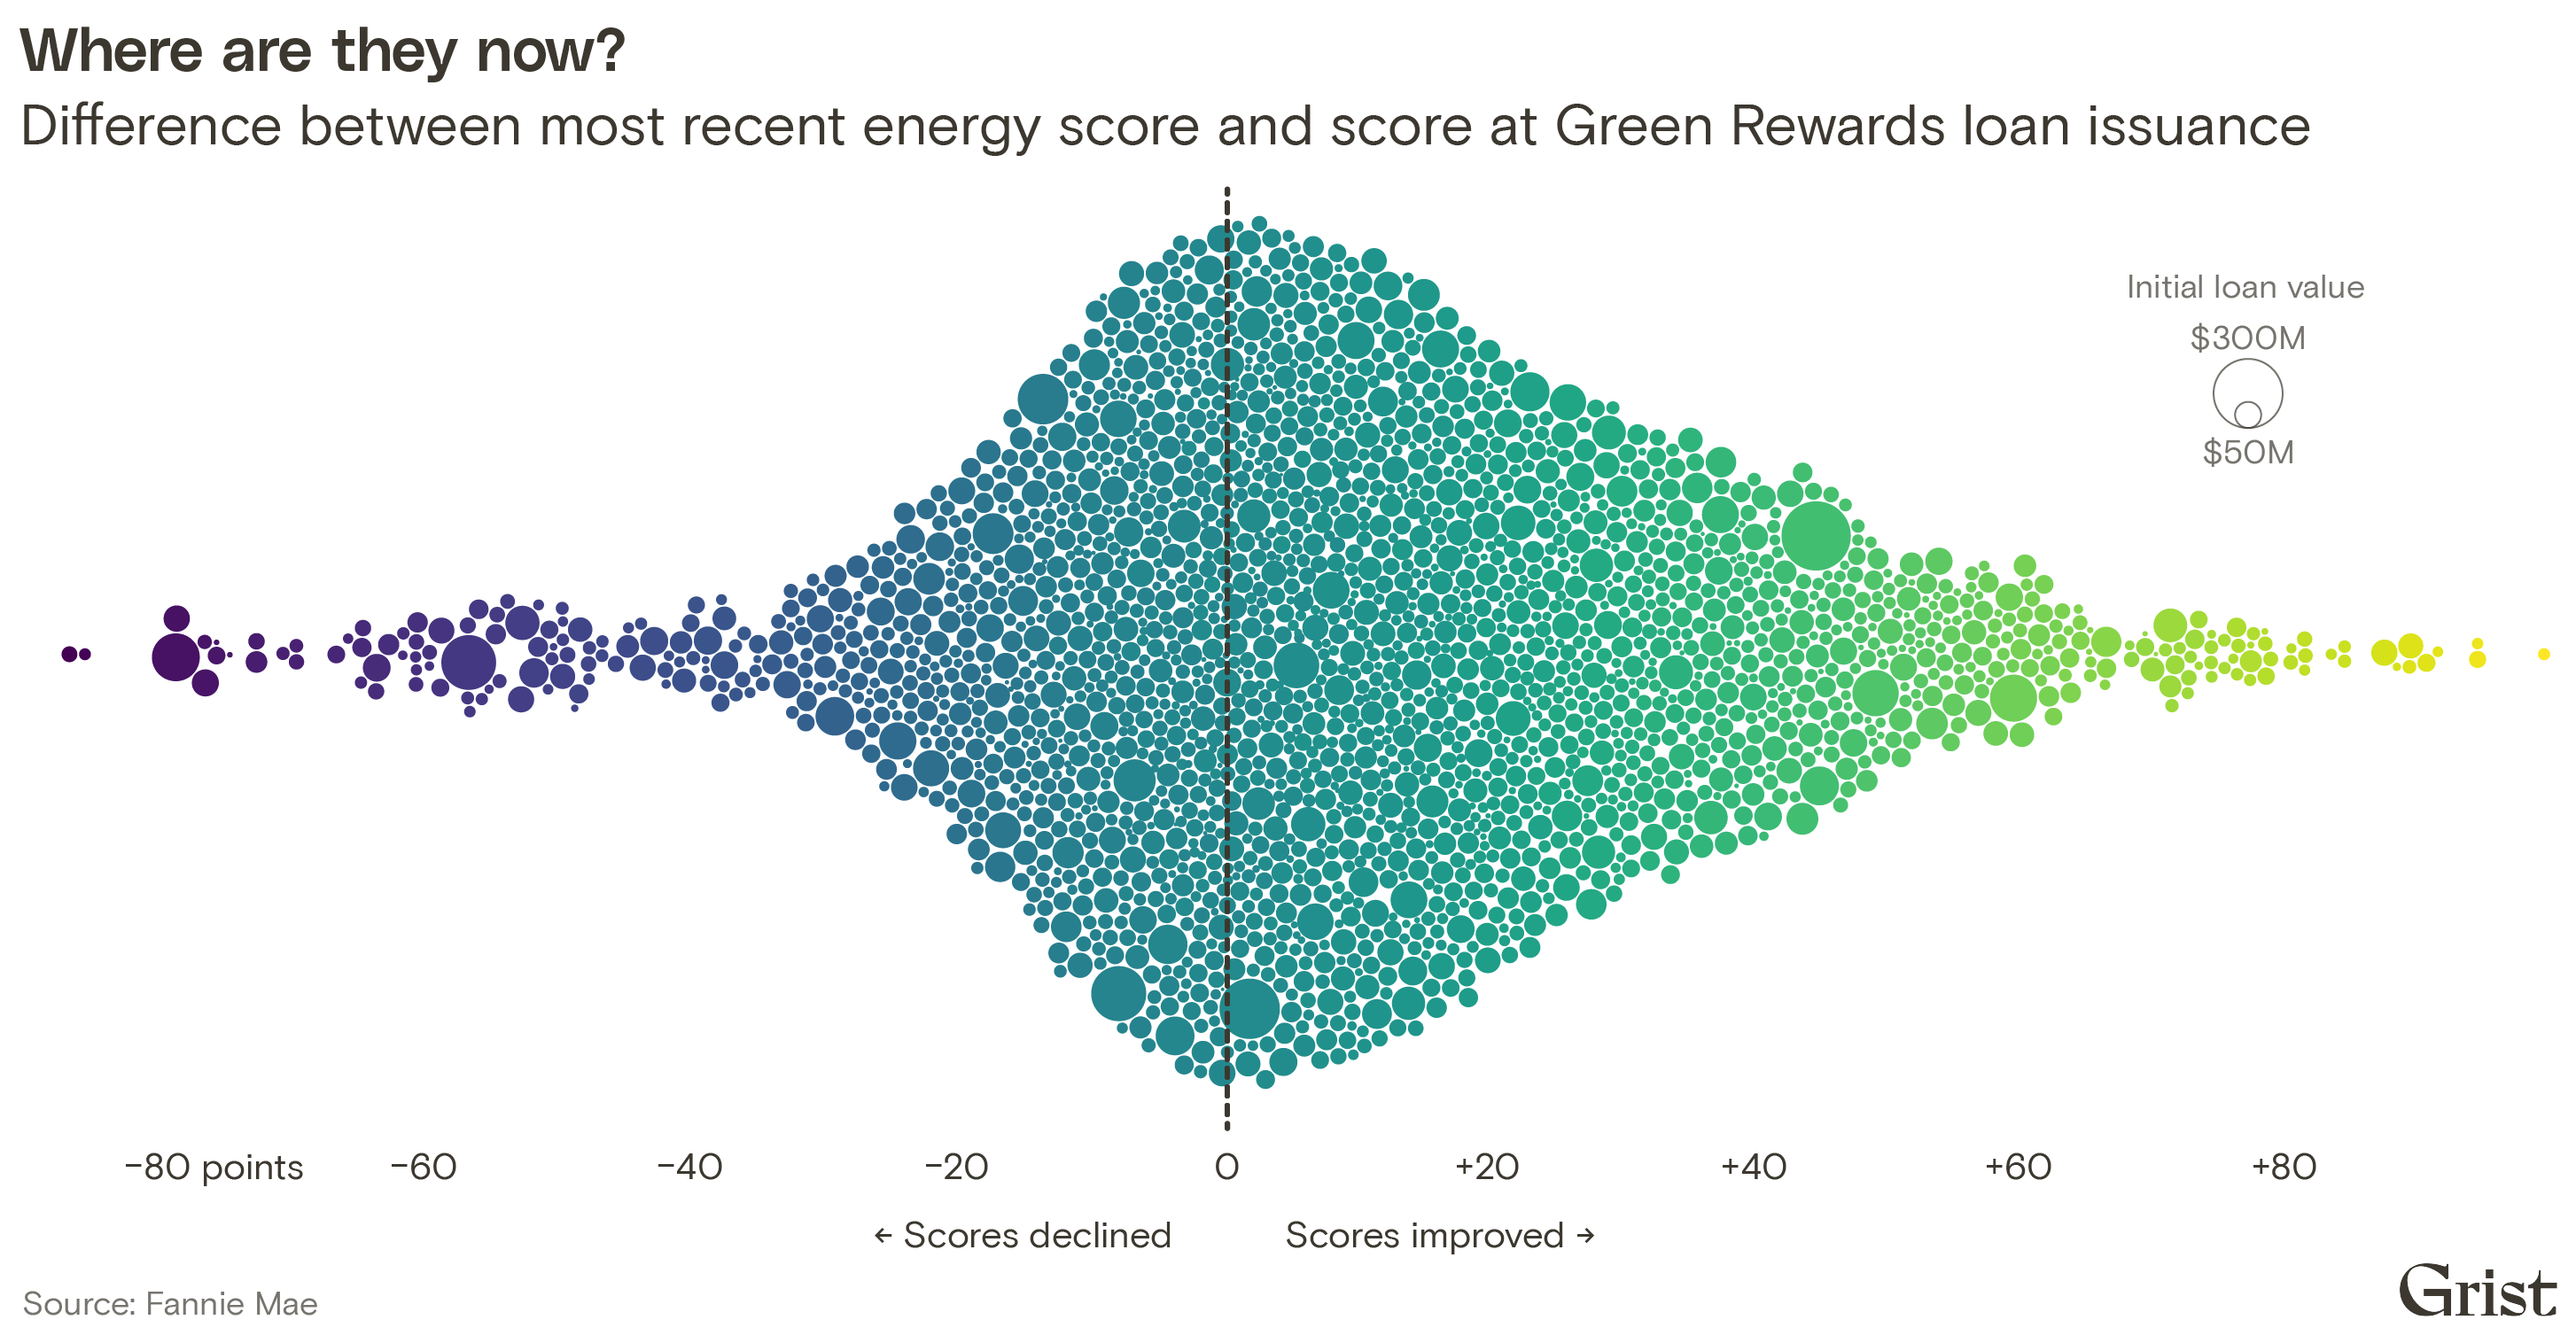 A bubble chart from Fannie Mae data showing properties' differences in energy scores between Green Rewards loan issuance and the most recent data year. While most properties improved their energy performance, many stagnated or declined.